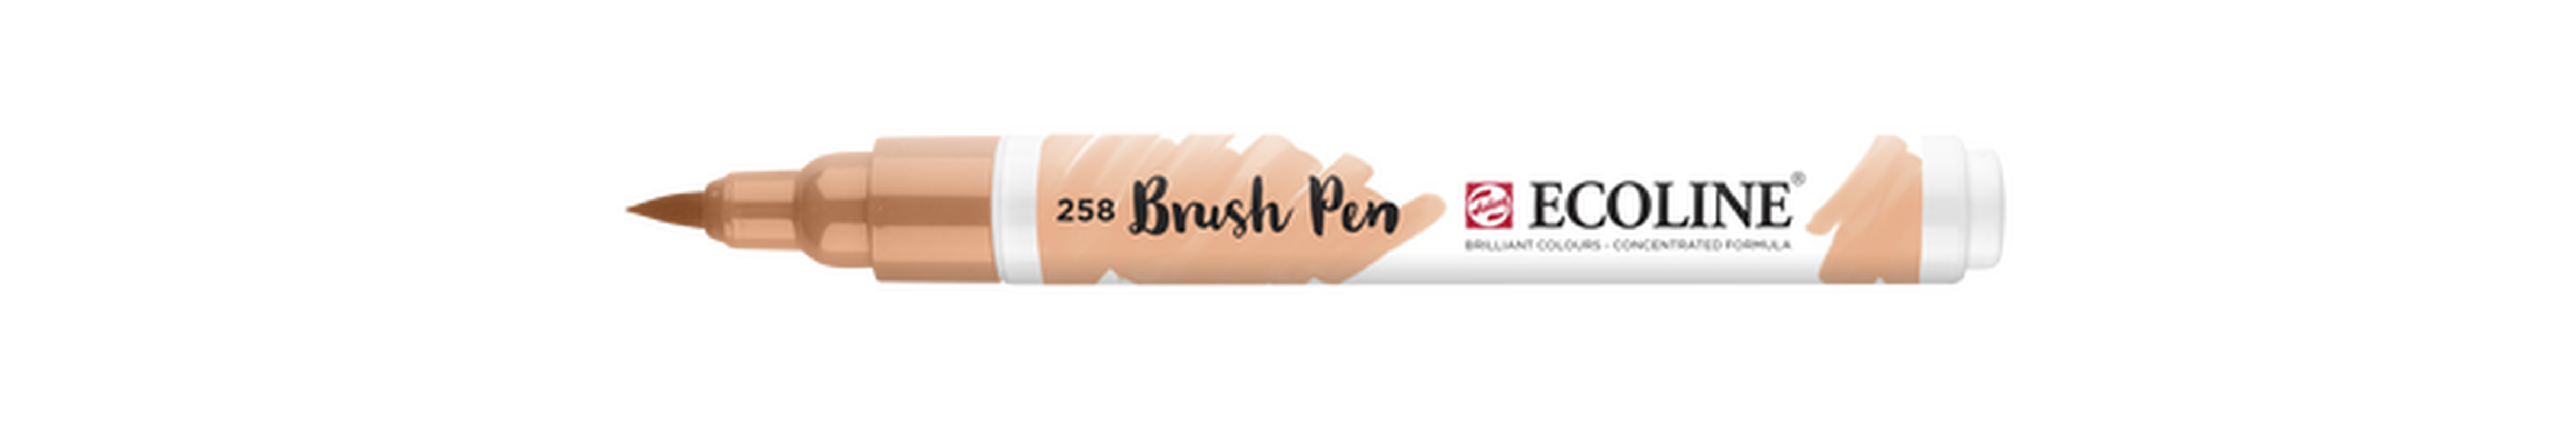 Talens Pinselstift Ecoline Nummer 258 Farbe Apricot